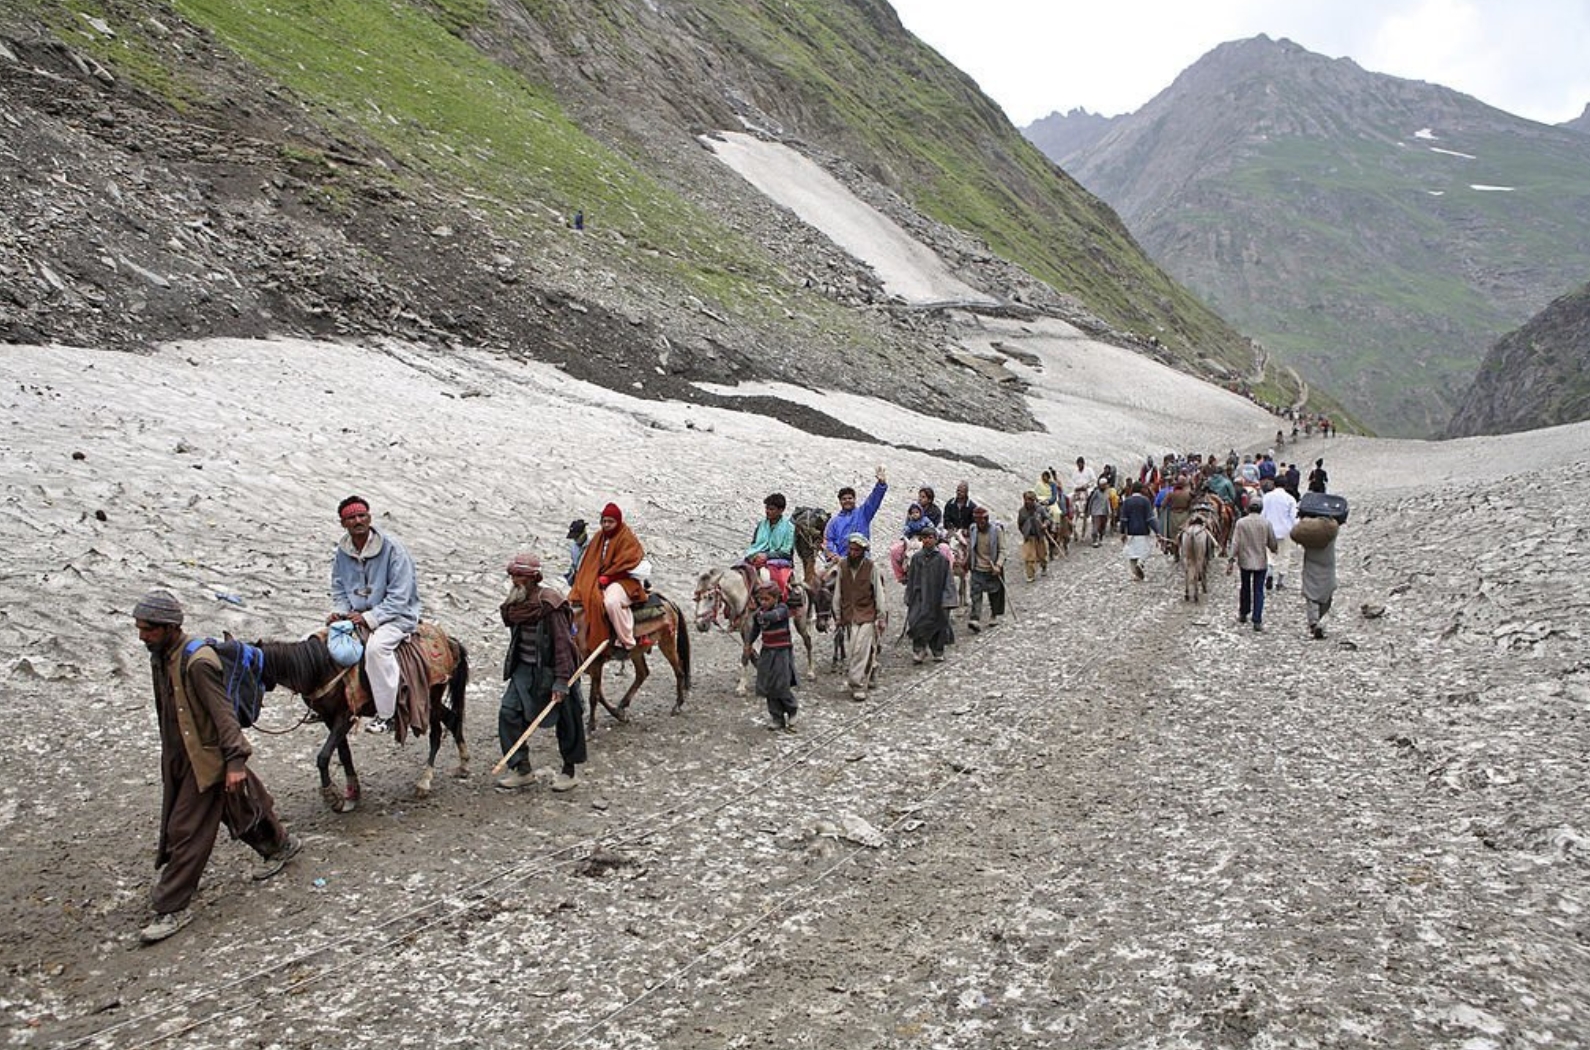 Pilgrimage to the holy Amarnath cave in Kashmir Himalayas. Amarnath cave is a Hindu shrine located in Jammu and Kashmir, India.